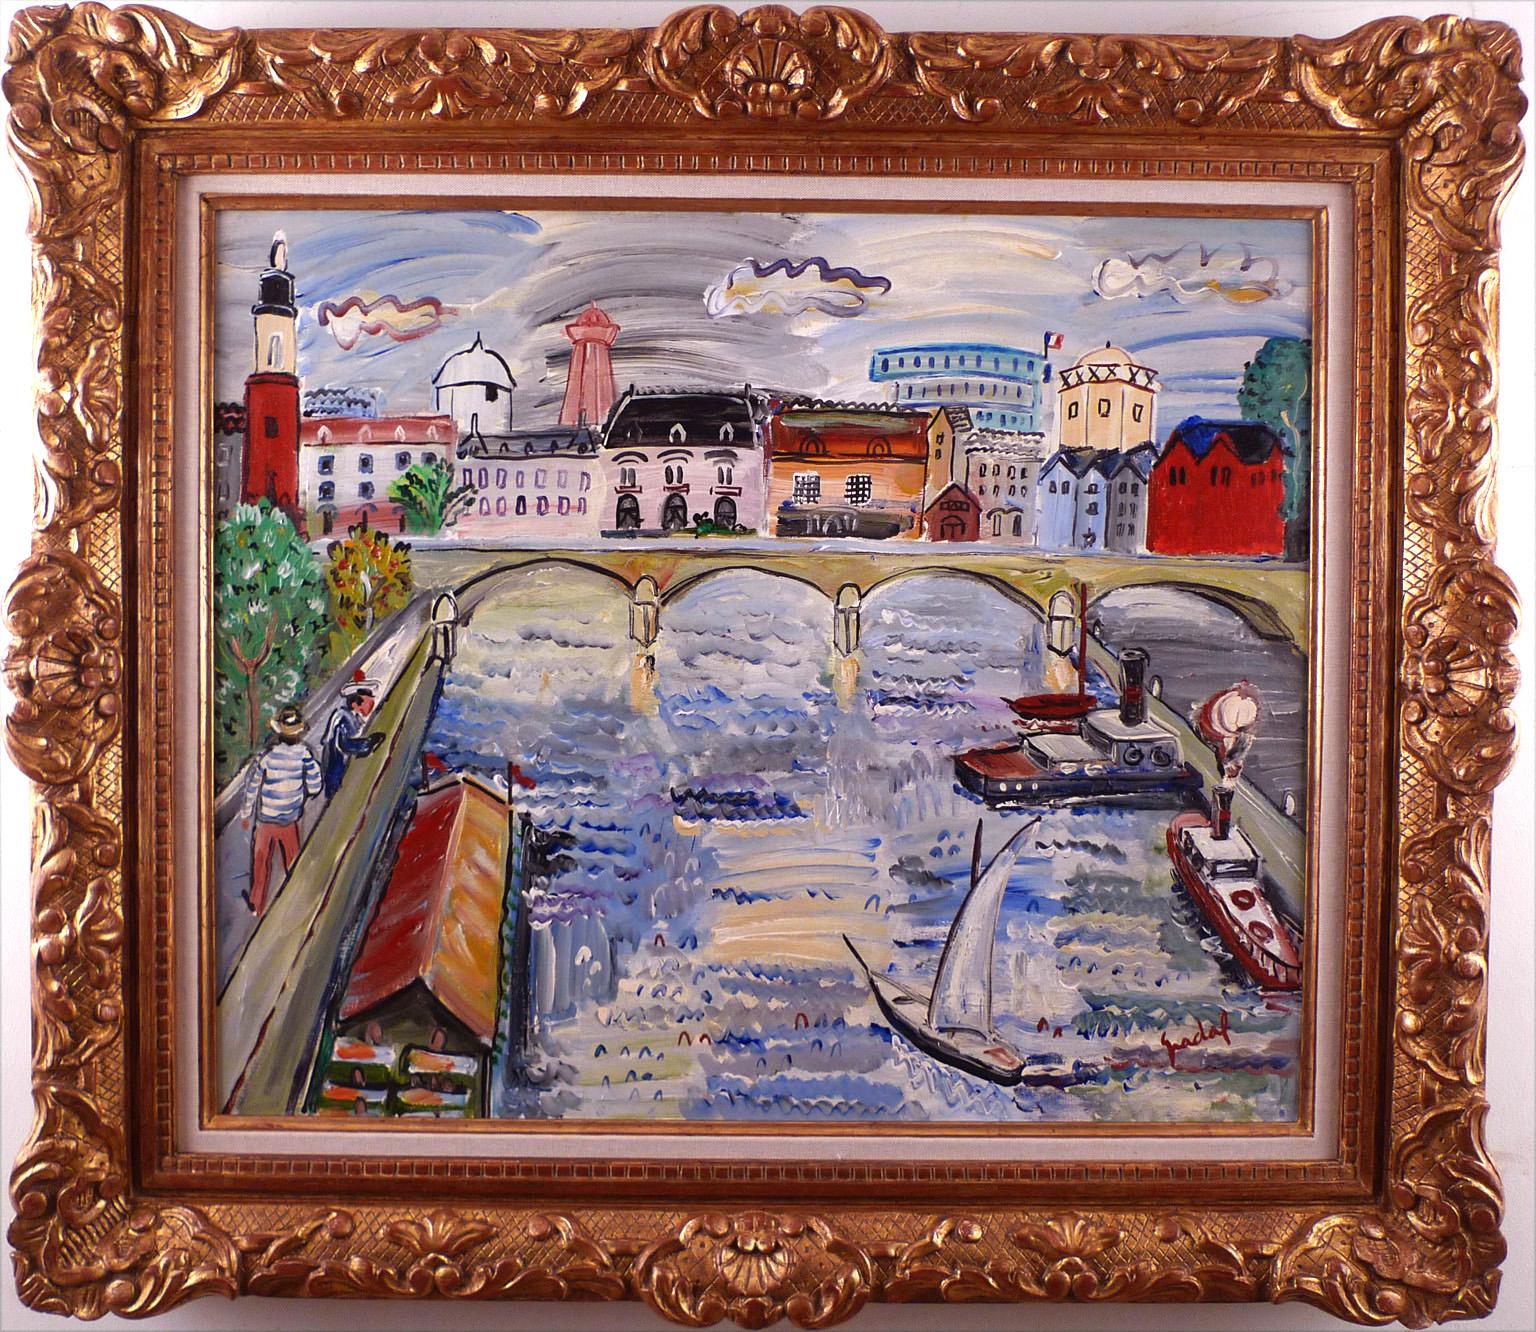 CARLOS NADAL
Spanish, 1917 - 1998
PONT DE VILLE
signed "Nadal" (lower right)
titled, signed and dated "PONT DE VILLE / Nadal / 1981" (on the reverse)
with the atelier stamp (on the reverse)
oil and acrylic on canvas
21-1/3 x 25-1/2 inches (54 x 65